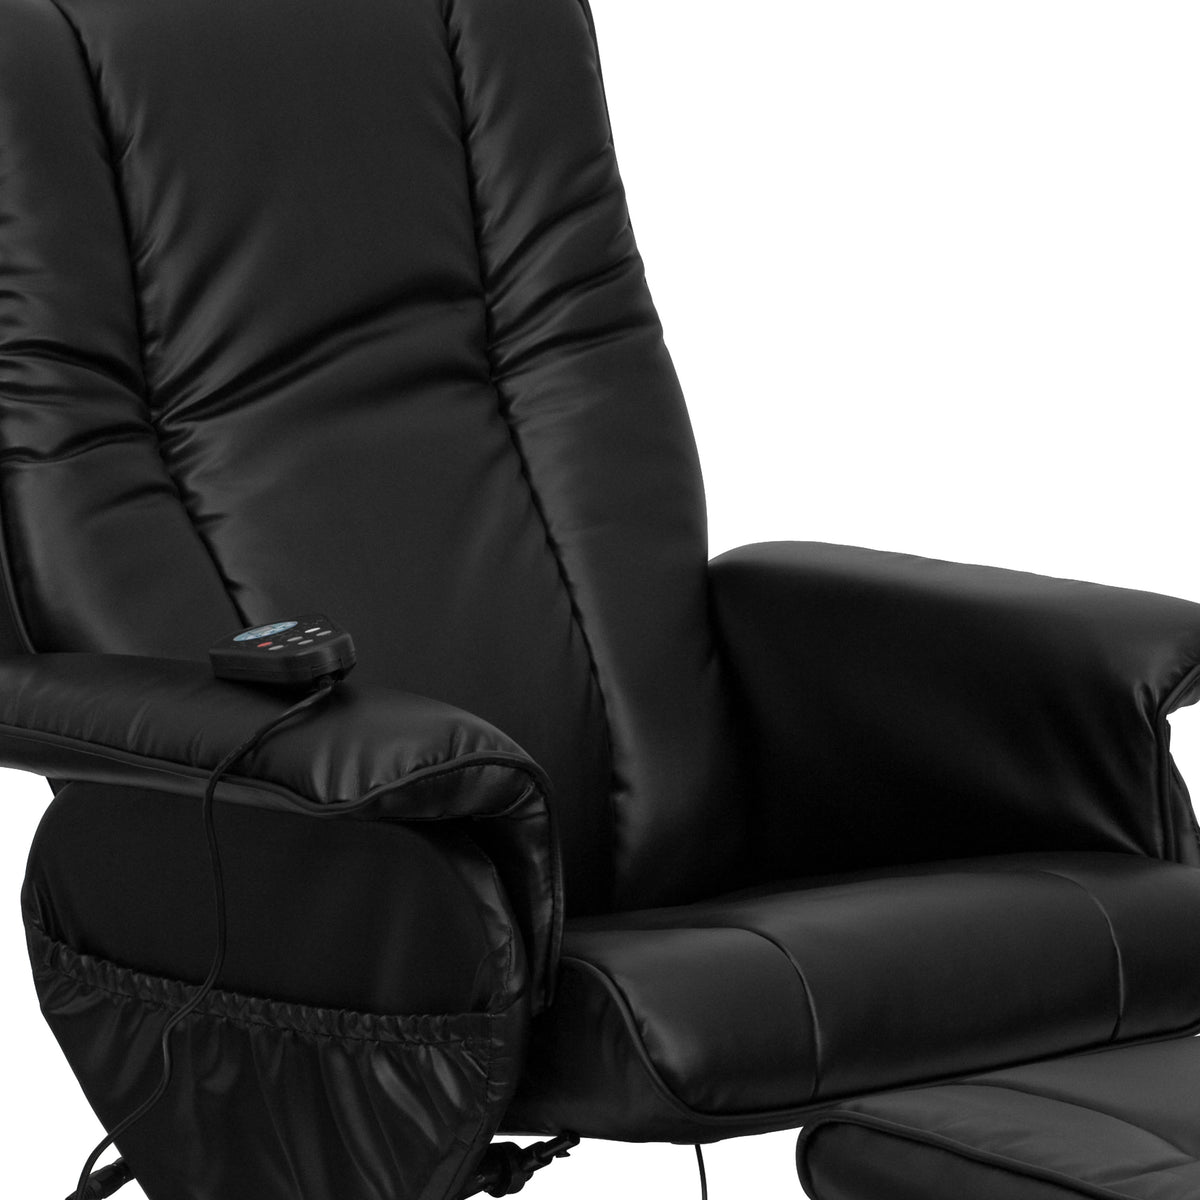 Black |#| Massaging and Heat Controlled Recliner & Ottoman Set in Black LeatherSoft